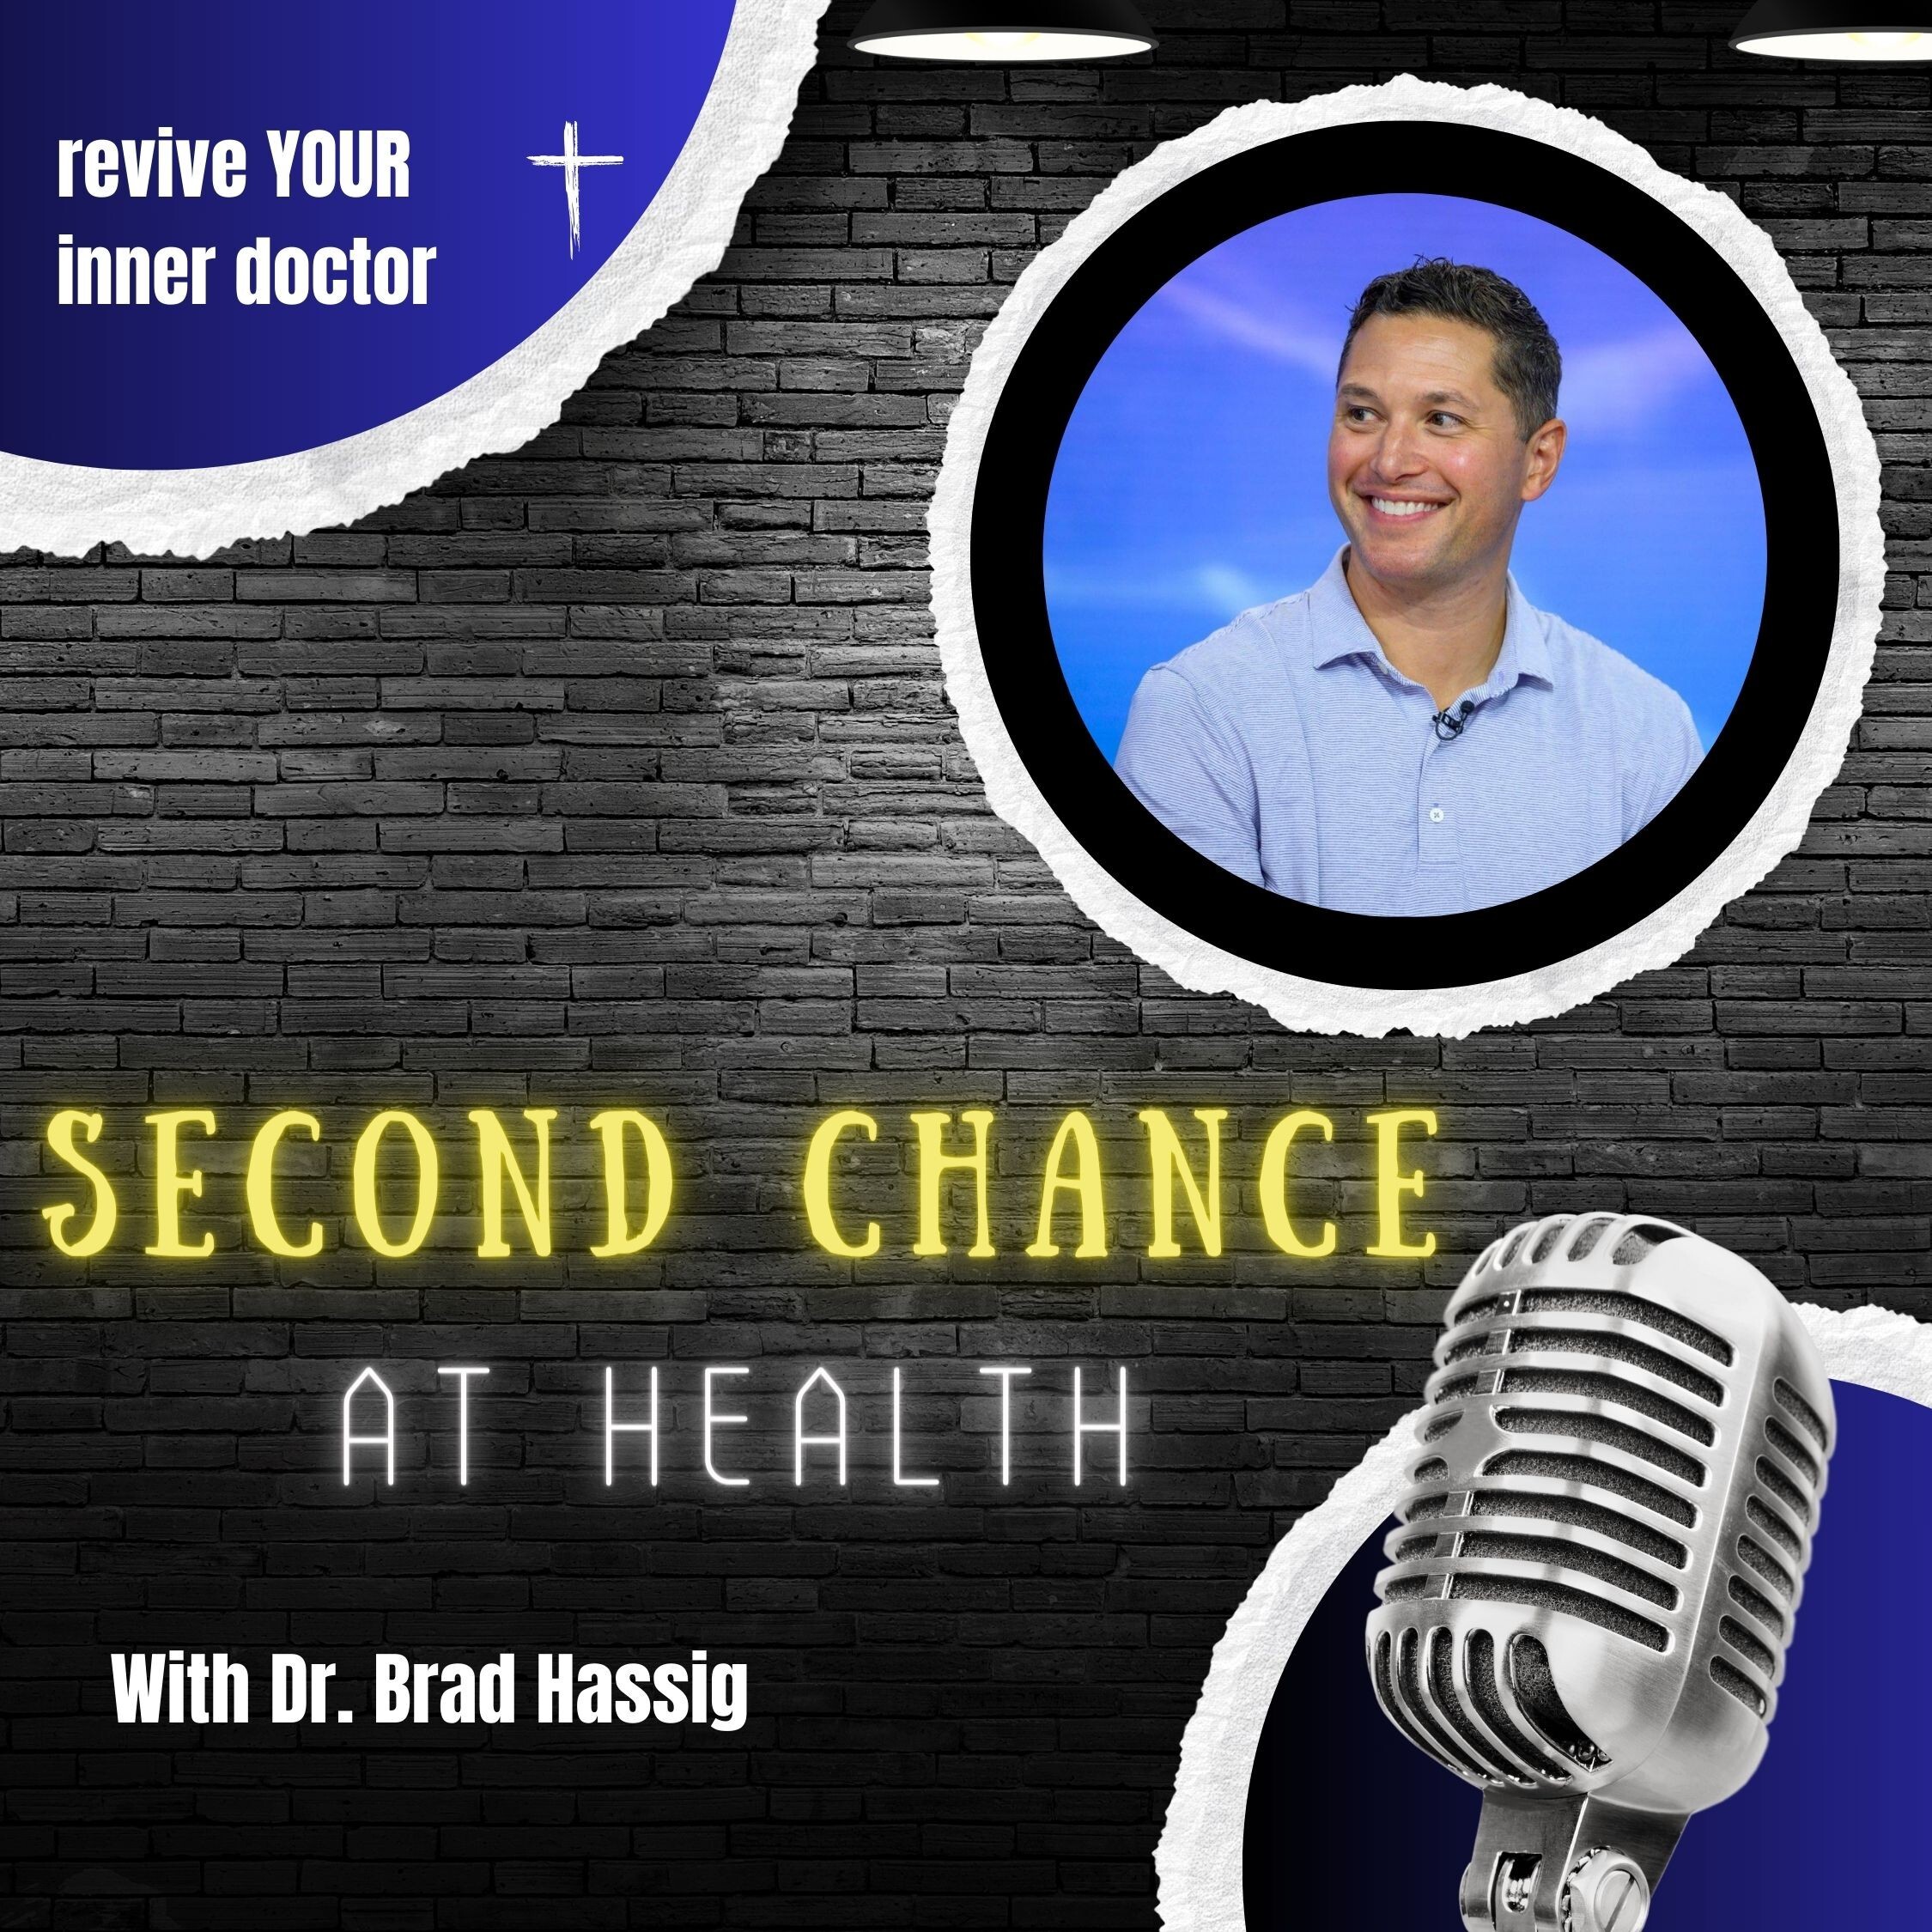 Second Chance at Health